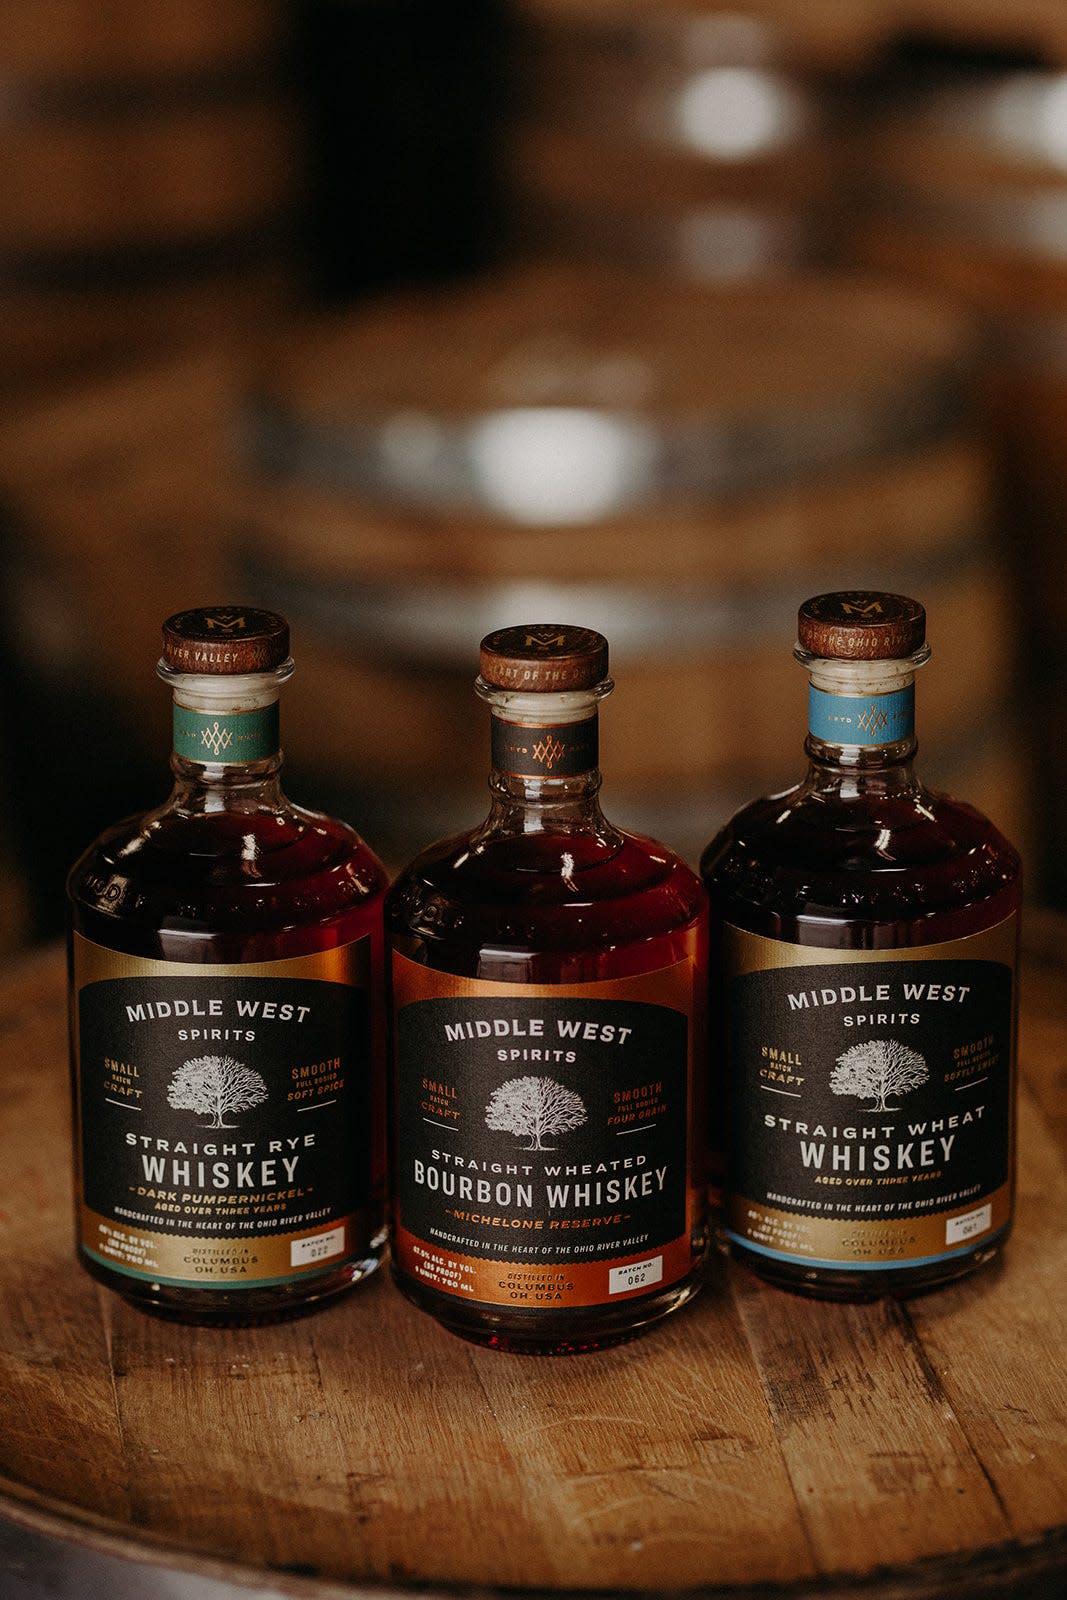 Middle West Spirits produces several types of liquor but may be best known for its whiskeys.